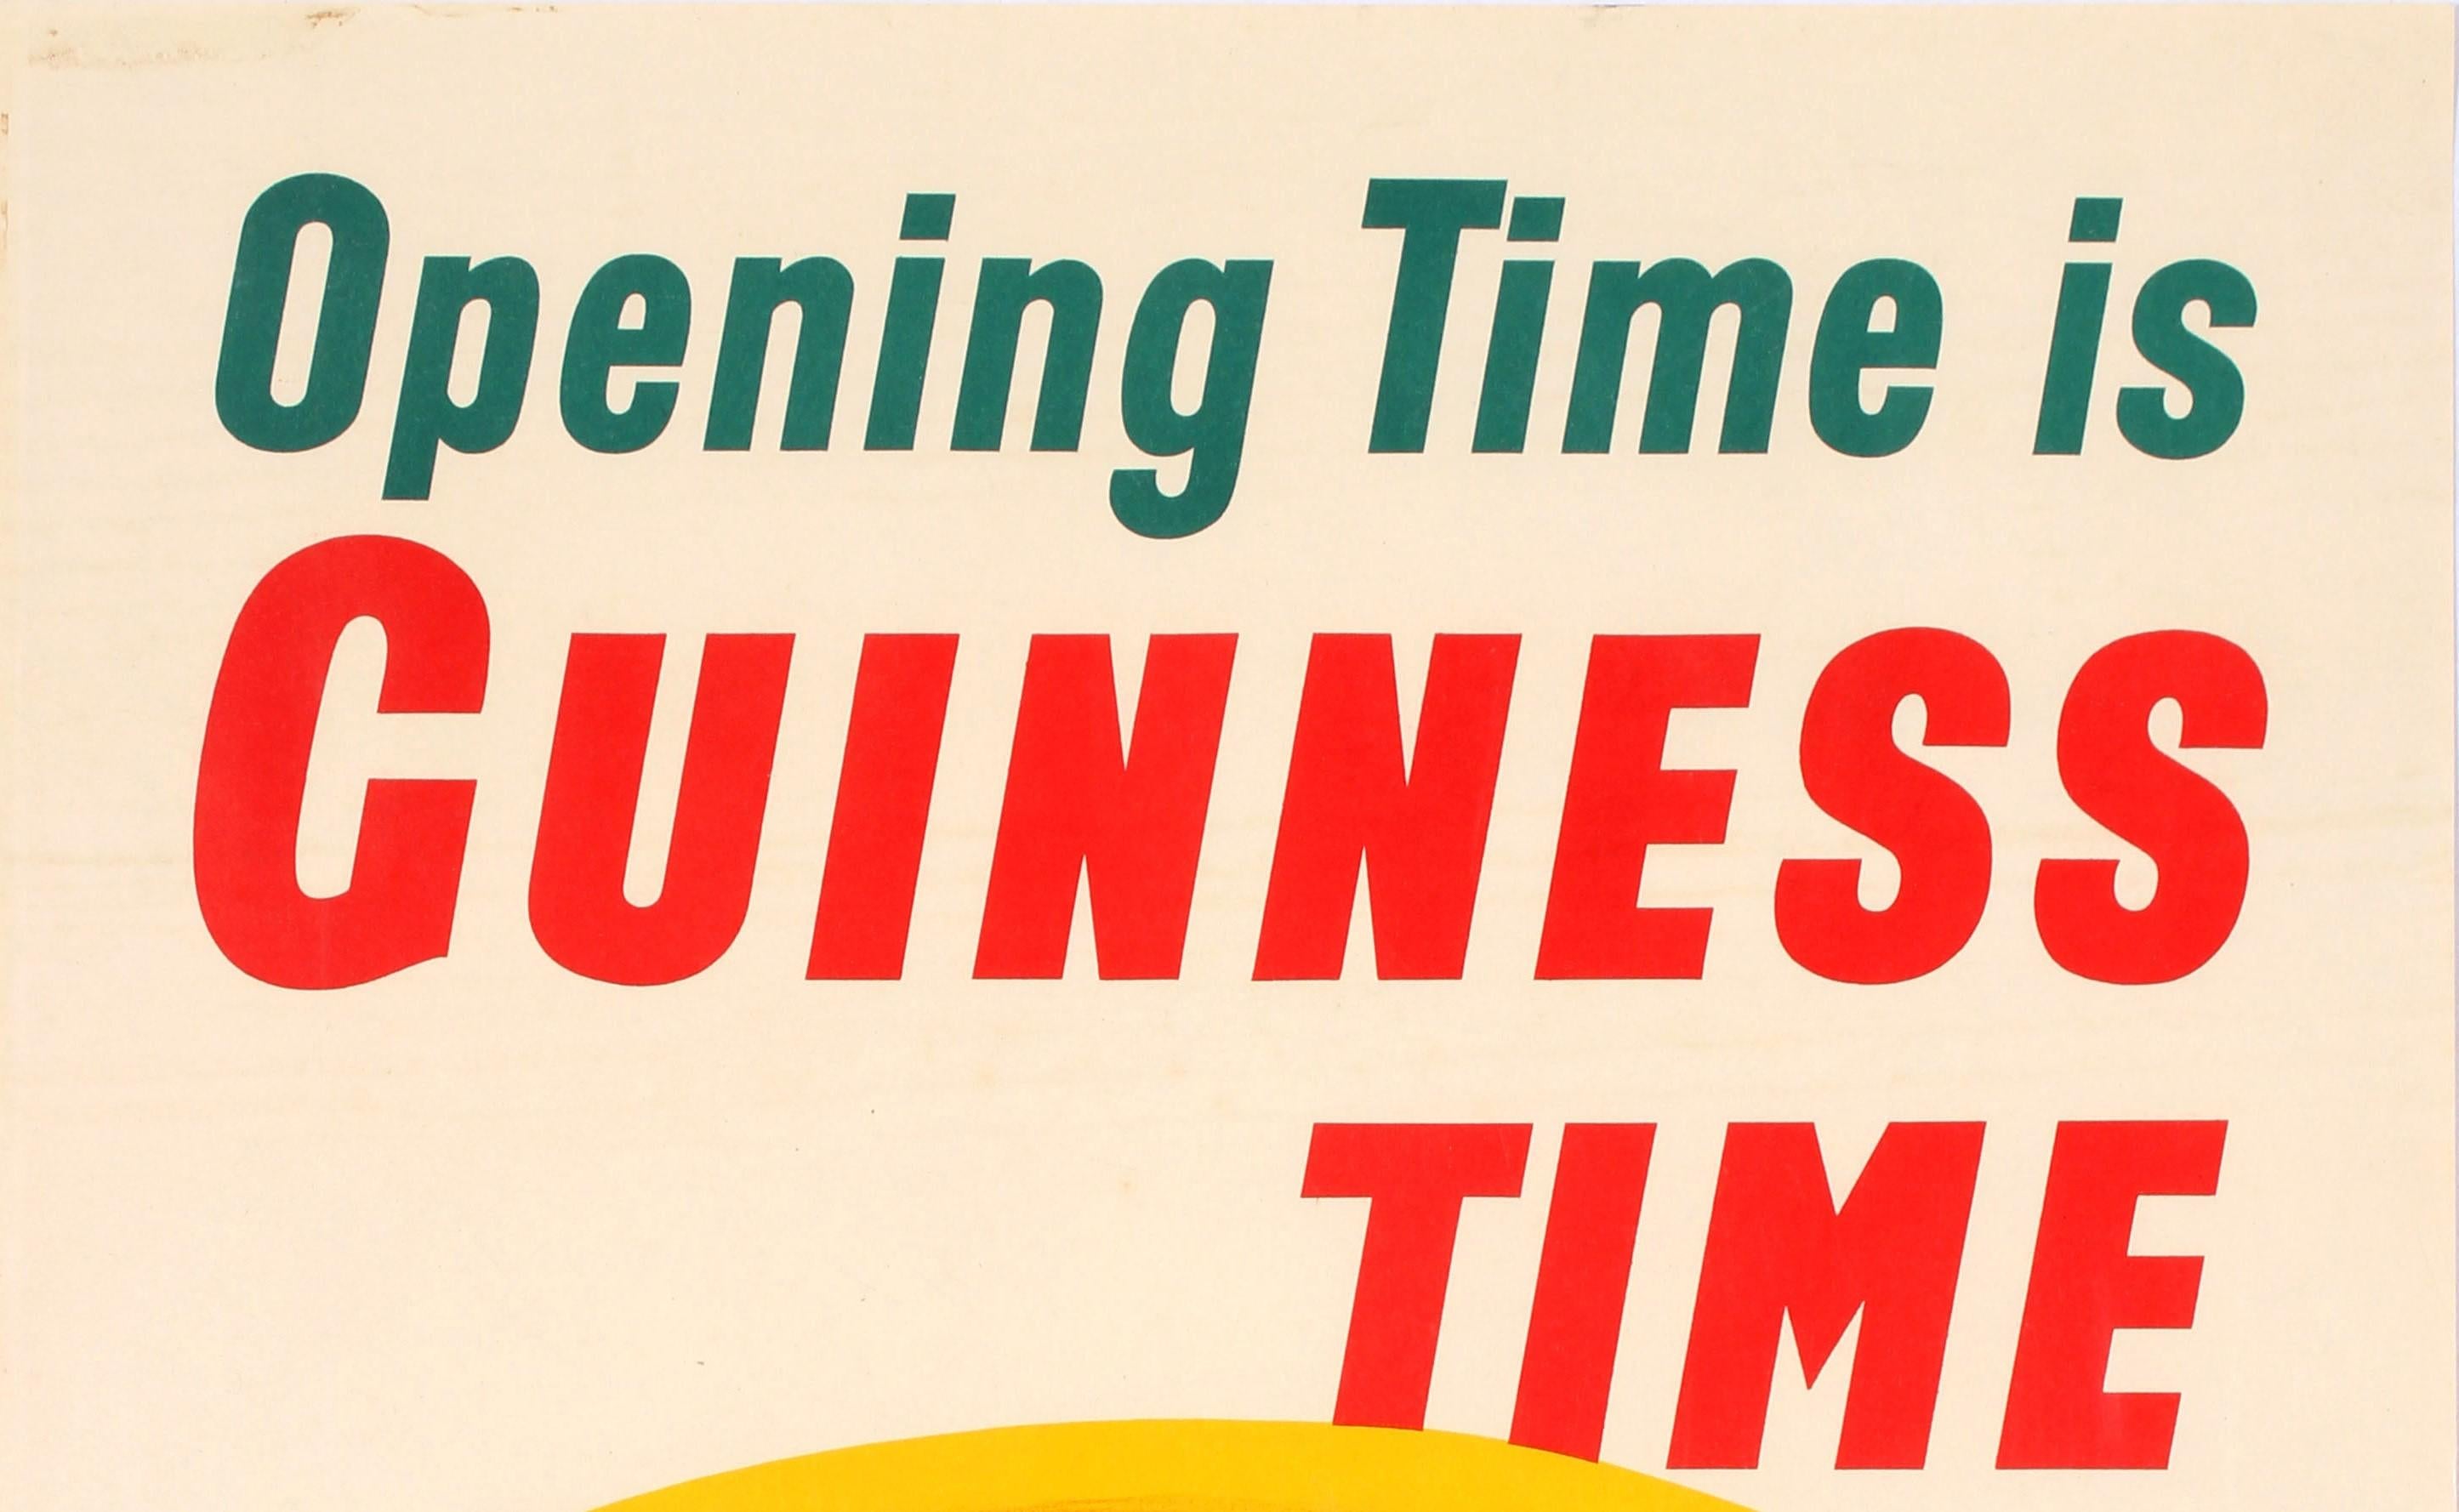 Original vintage Guinness advertising poster - opening time is Guinness time - featuring an iconic design depicting the trademark smiling toucan using his colorful bill to open a bottle of Guinness extra stout, the title in bold green and red